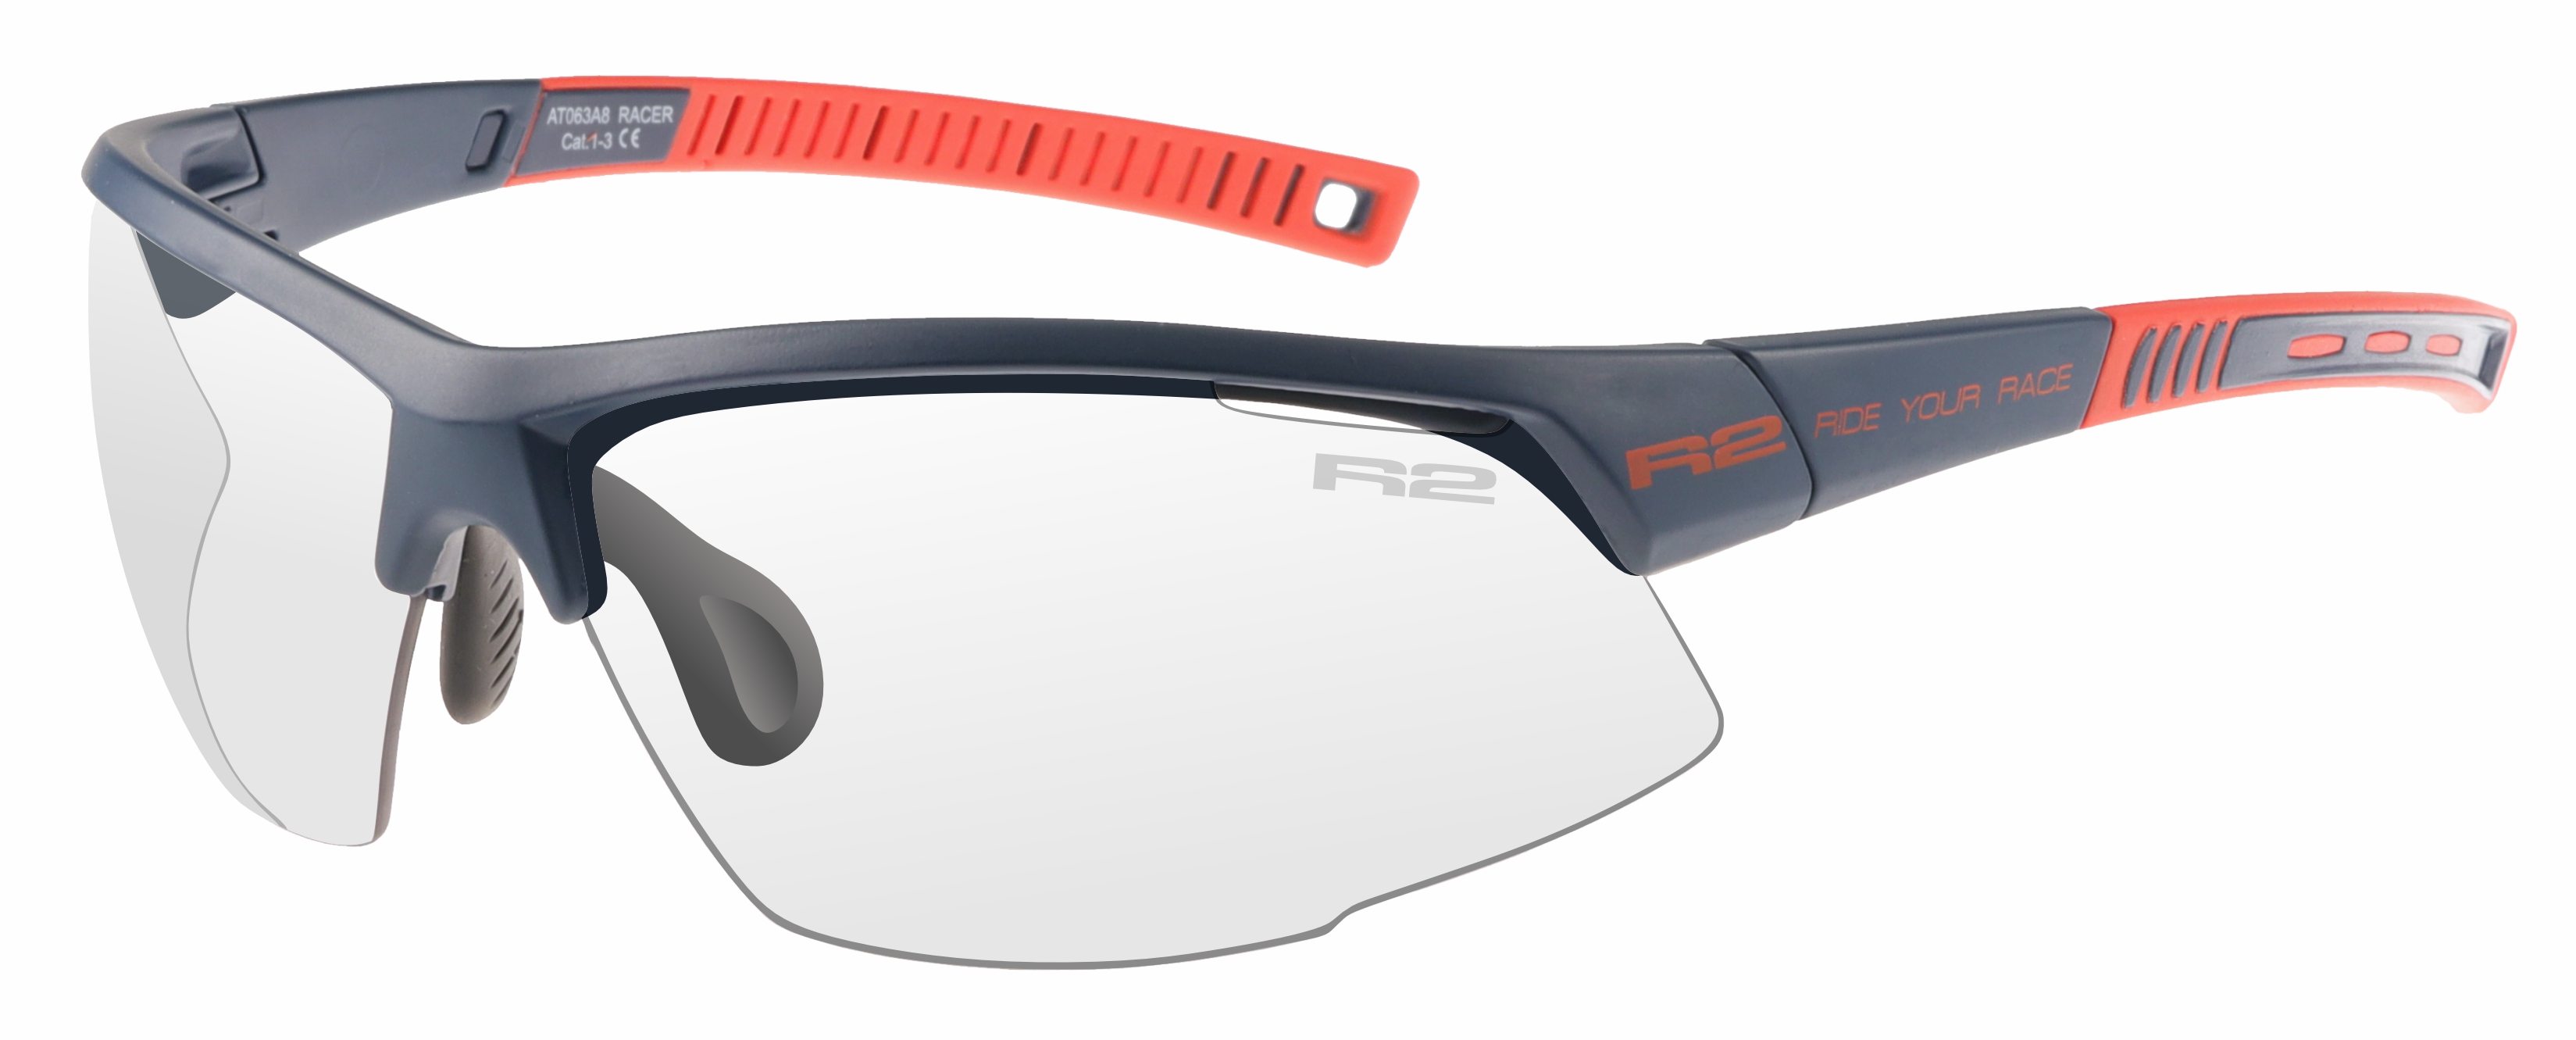 Photochromatic sunglasses  R2 RACER AT063A8 standard